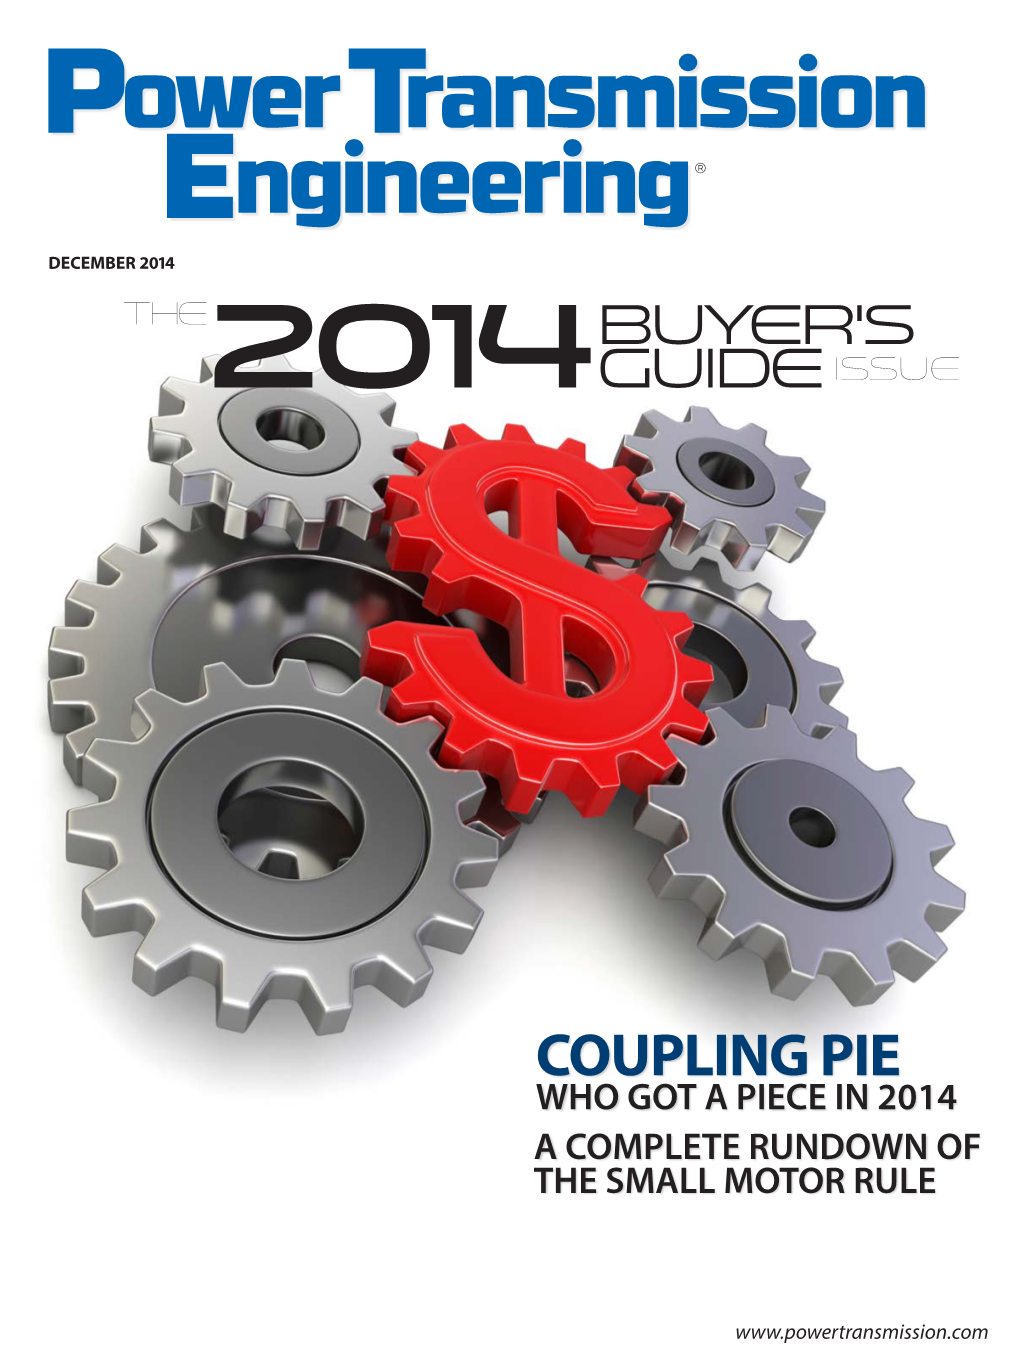 Coupling Pie Who Got a Piece in 2014 a Complete Rundown of the Small Motor Rule